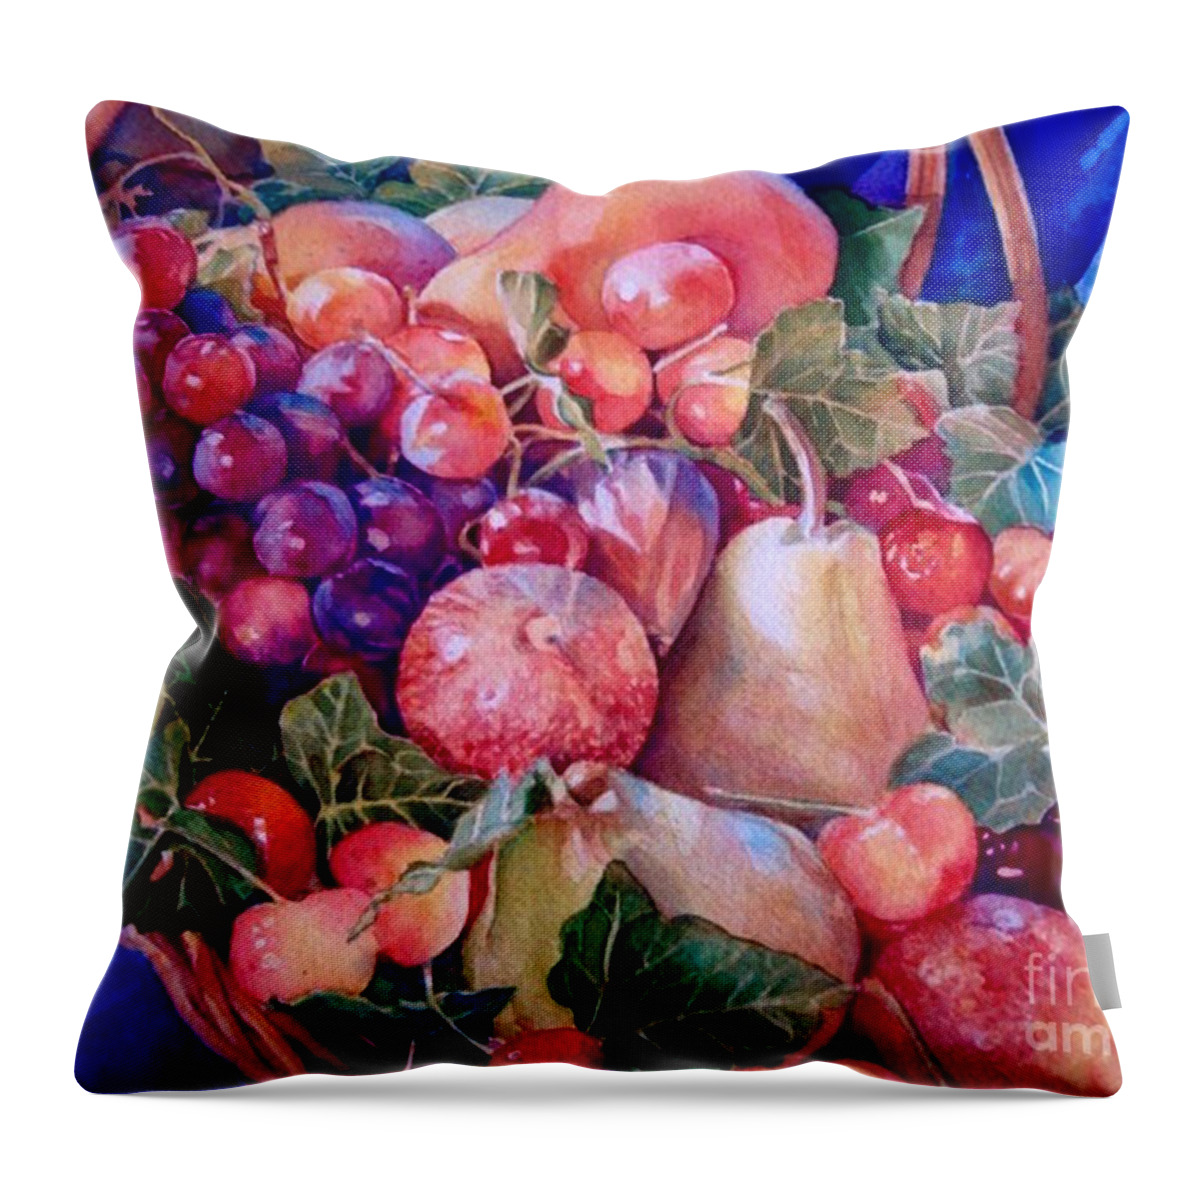 Basket Throw Pillow featuring the painting Panier de fruits by Francoise Chauray